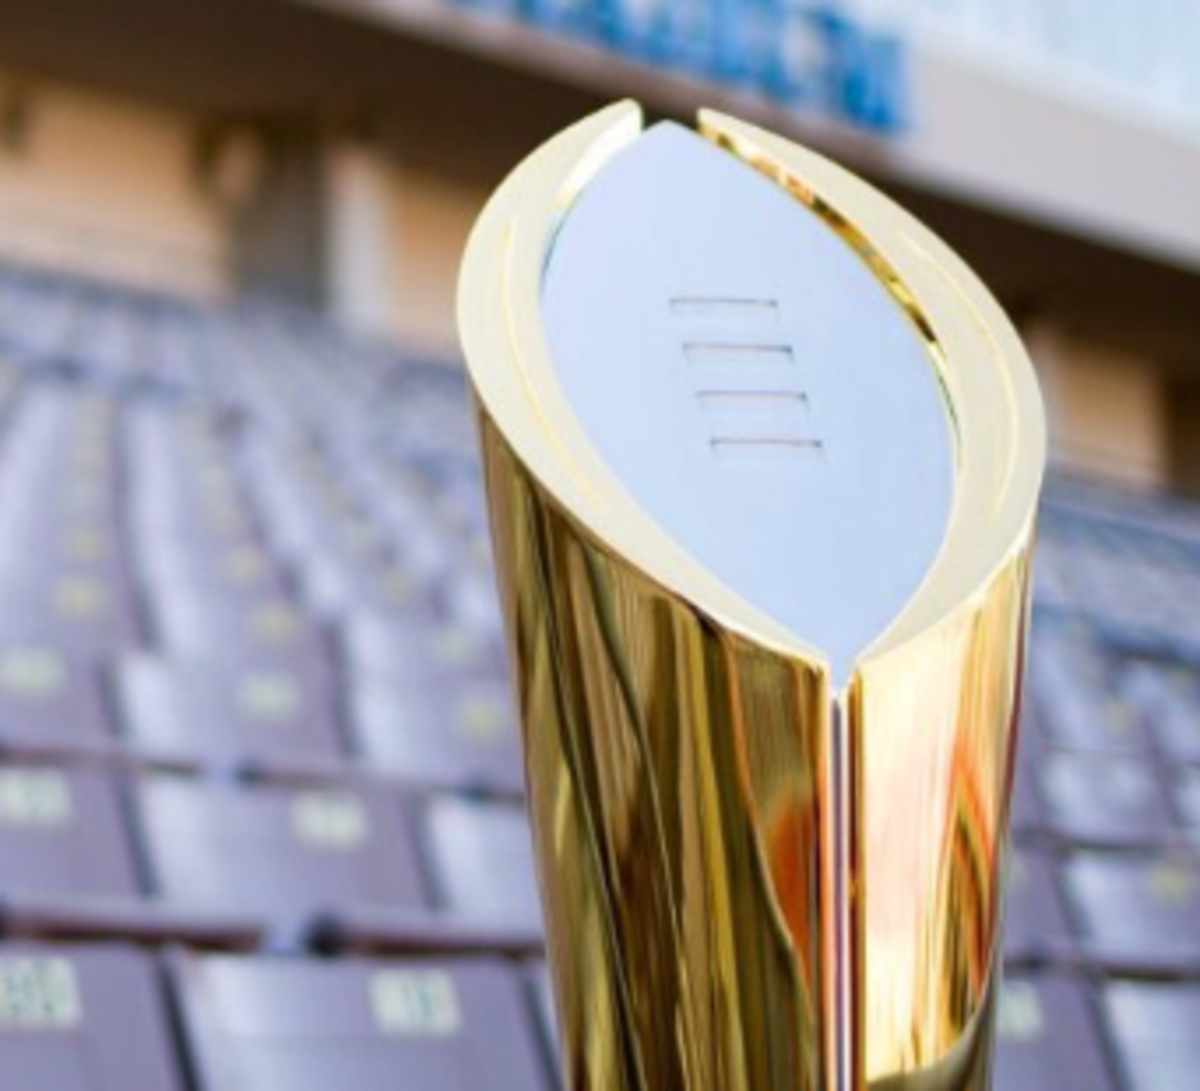 College Football Playoff trophy.